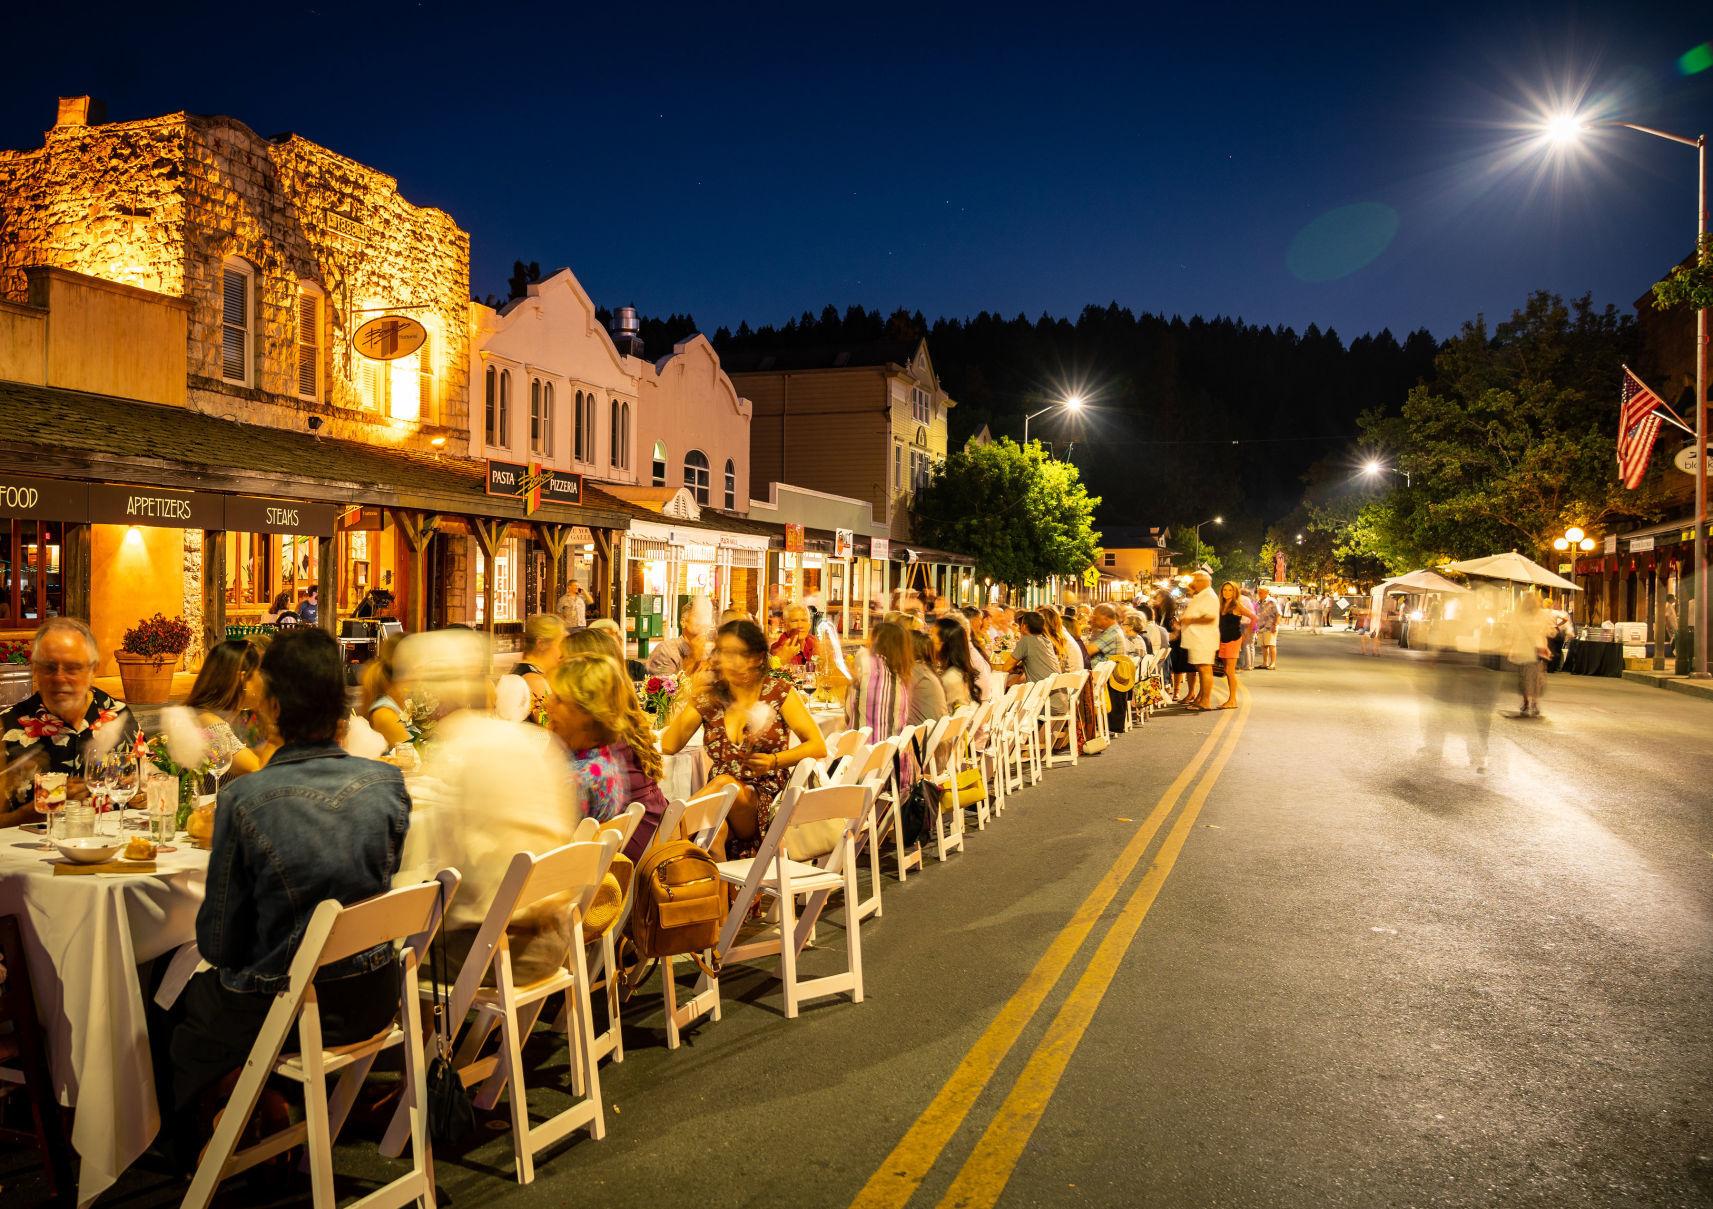 Tickets go on sale July 15 for the Calistoga Harvest Table Sept. 8